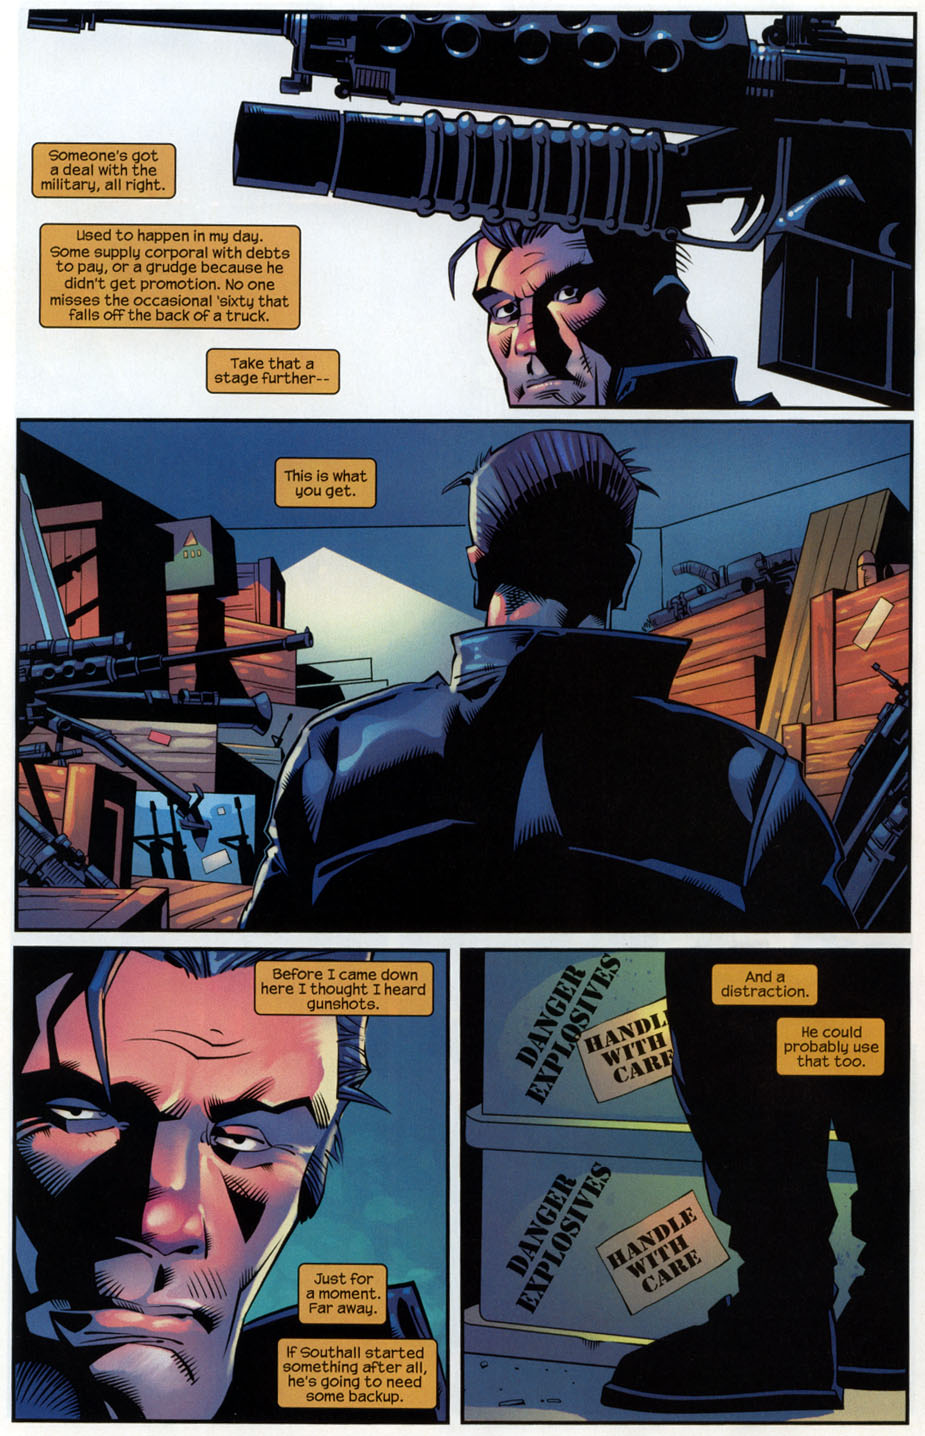 The Punisher (2001) issue 30 - Streets of Laredo #03 - Page 18